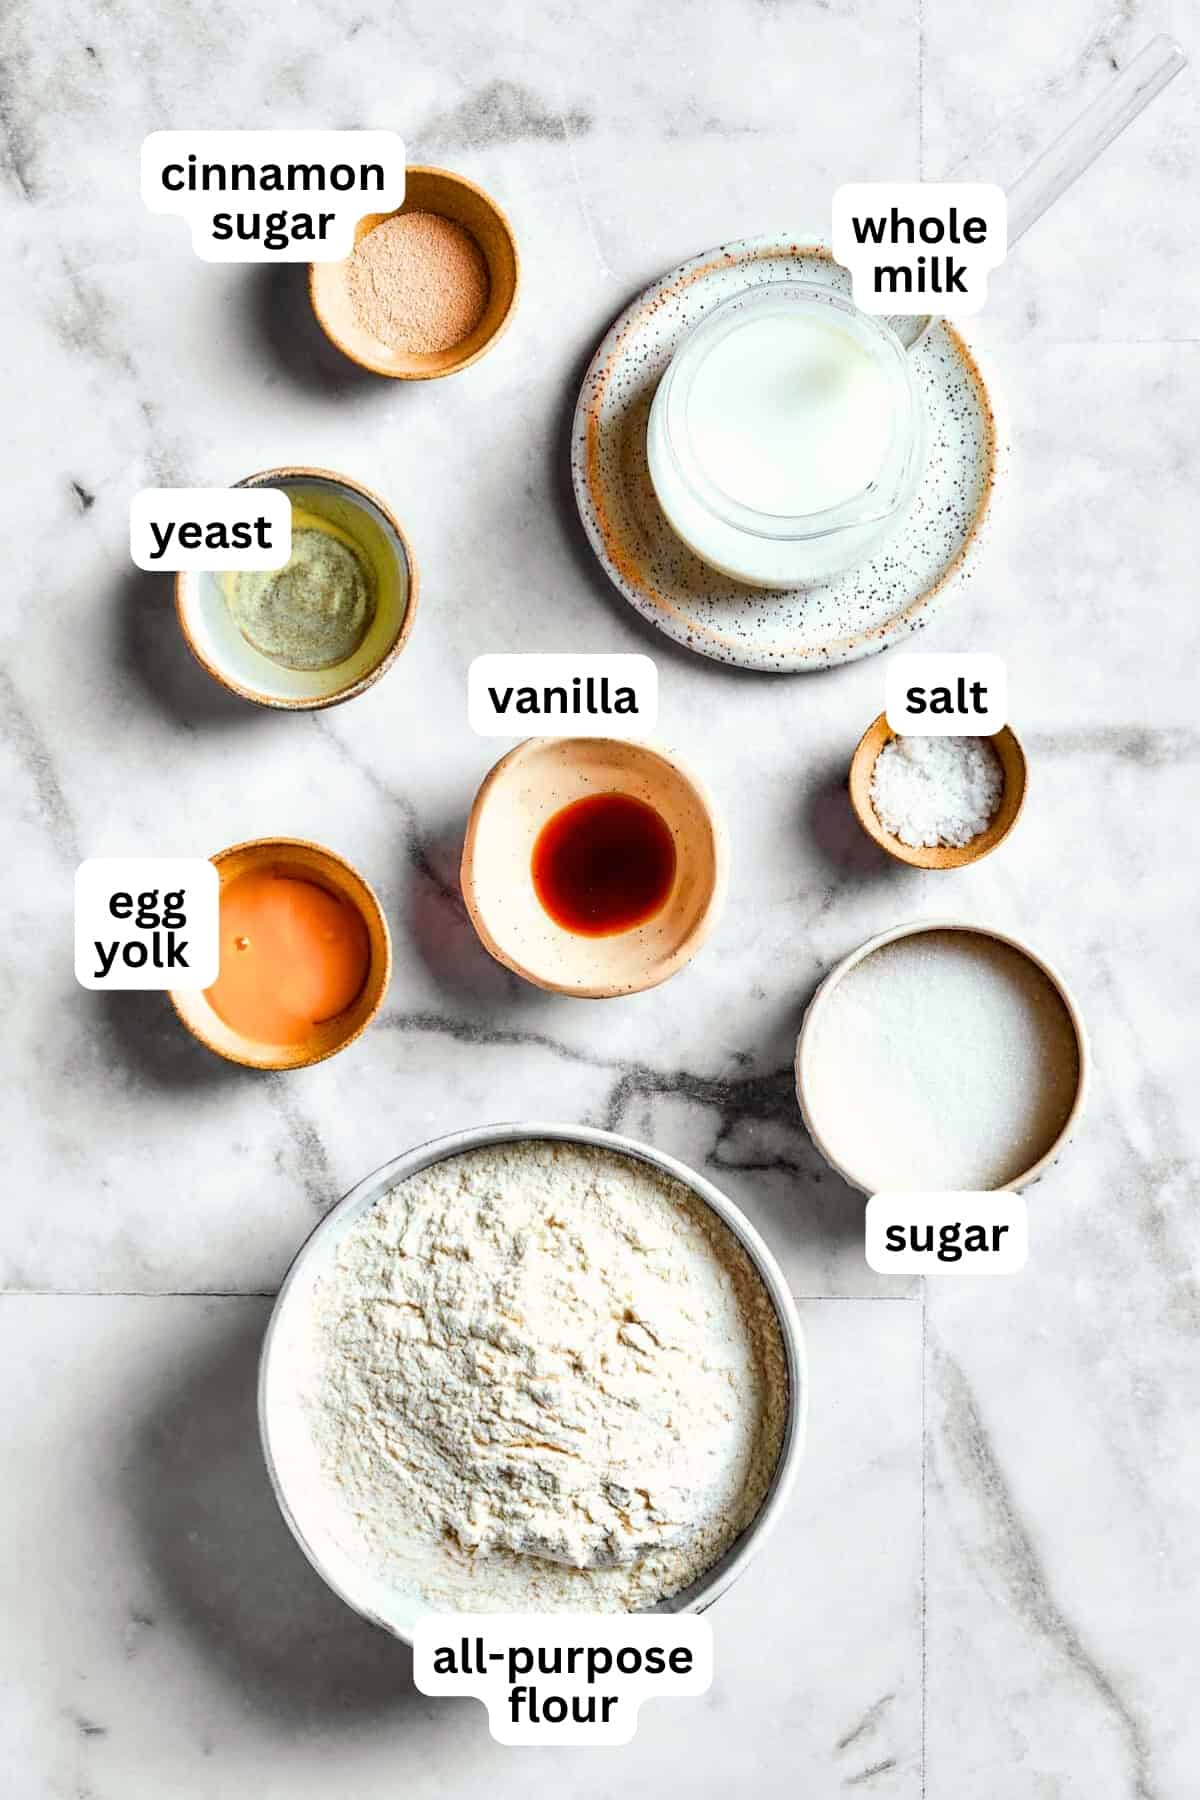 Overhead image of ingredients used to make Star Bread.